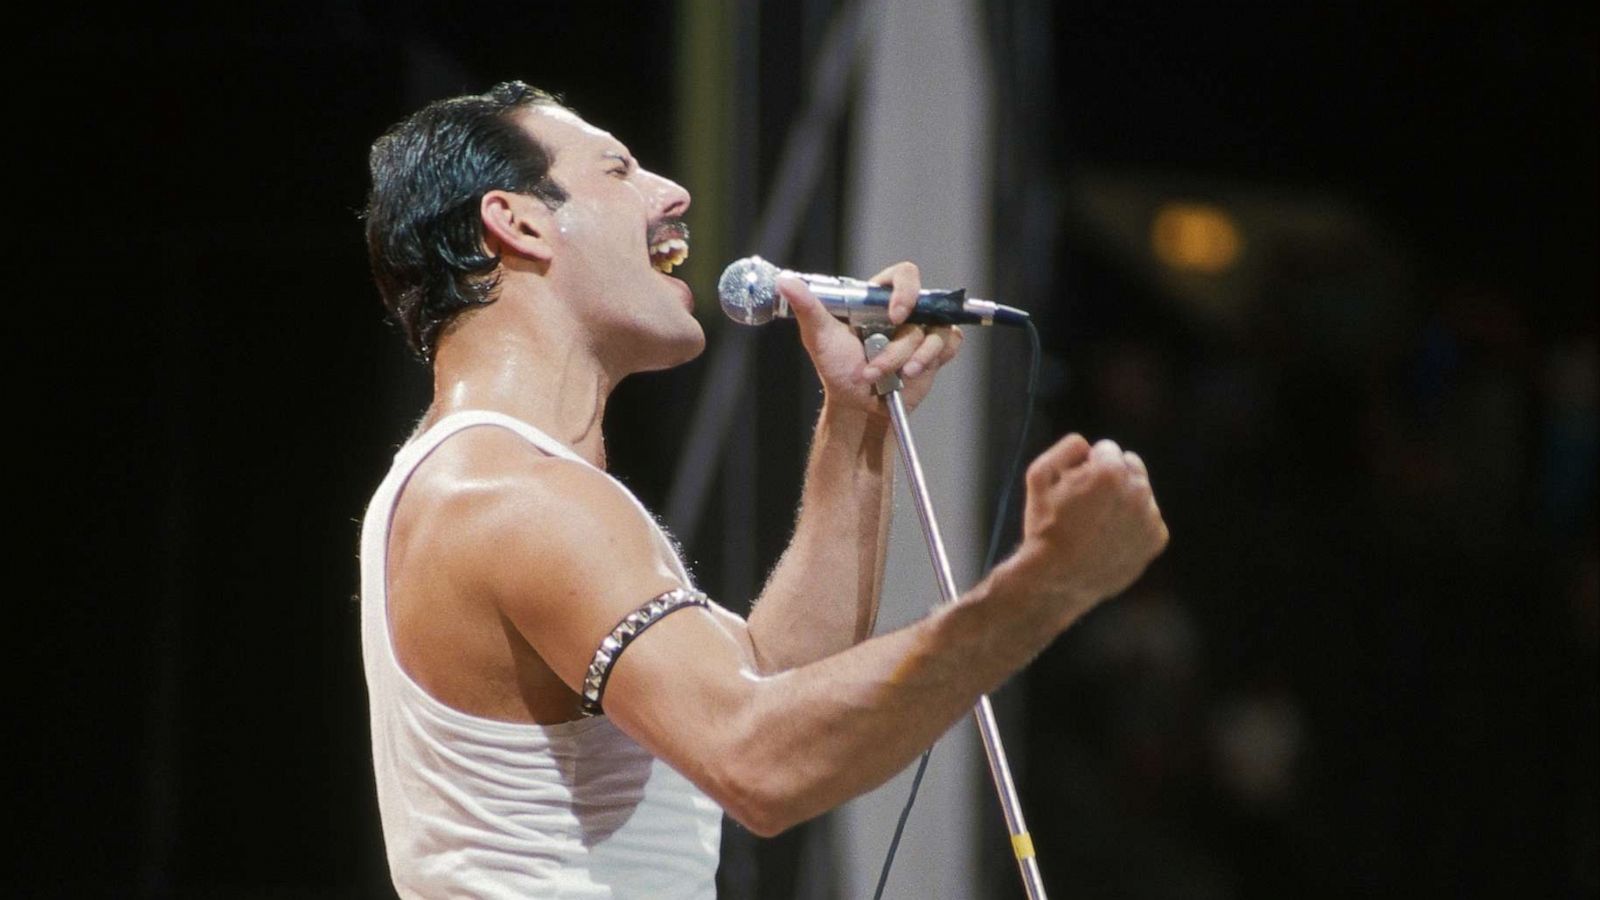 i just read that the march of the black queen - Freddie Mercury